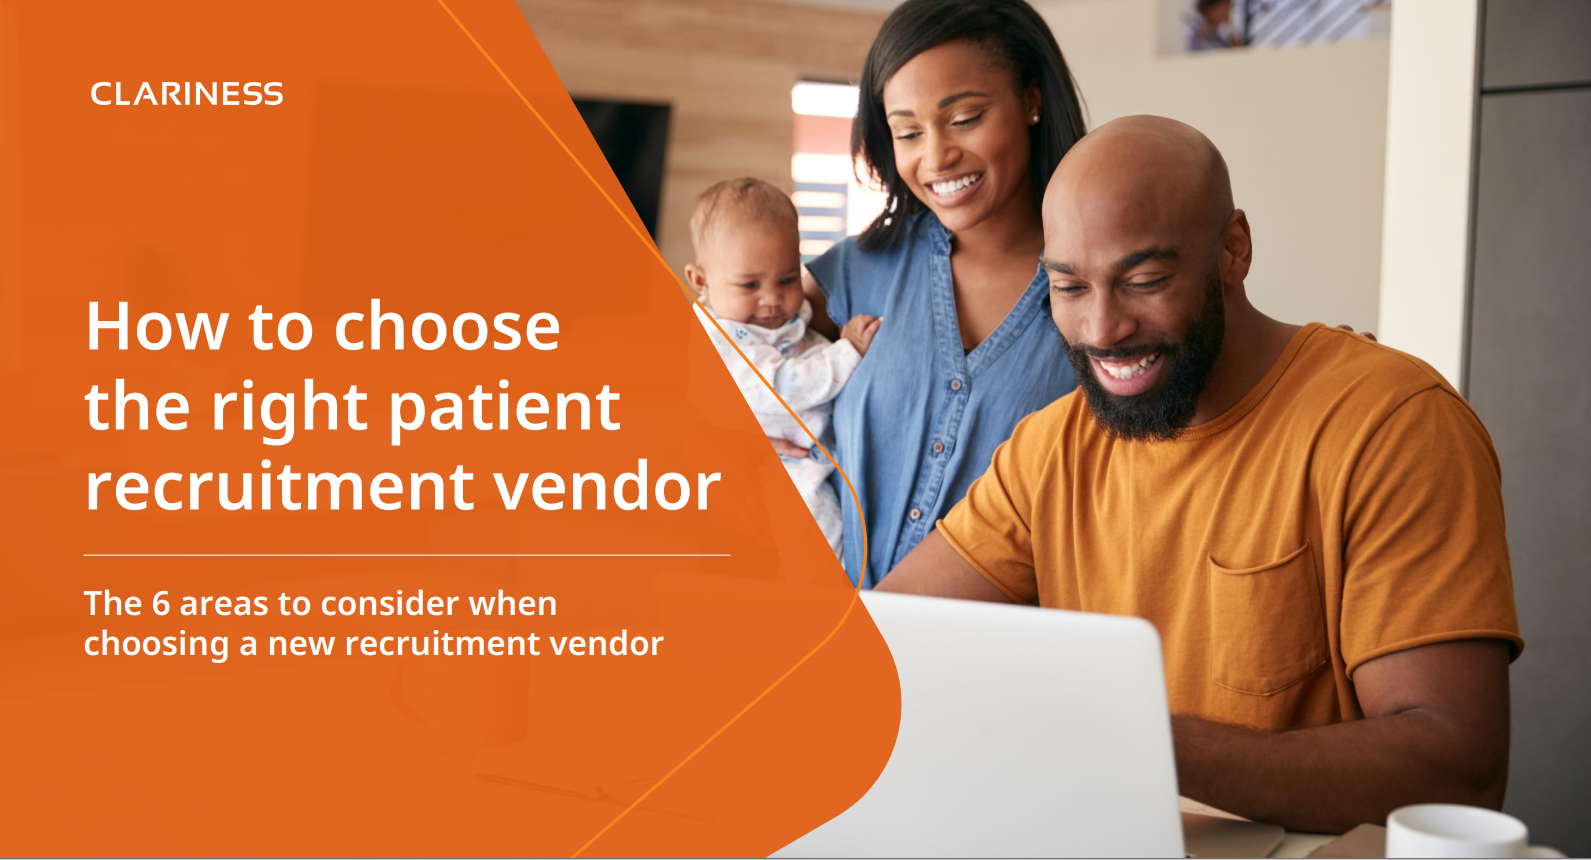 Guide for choosing the right patient recruitment company